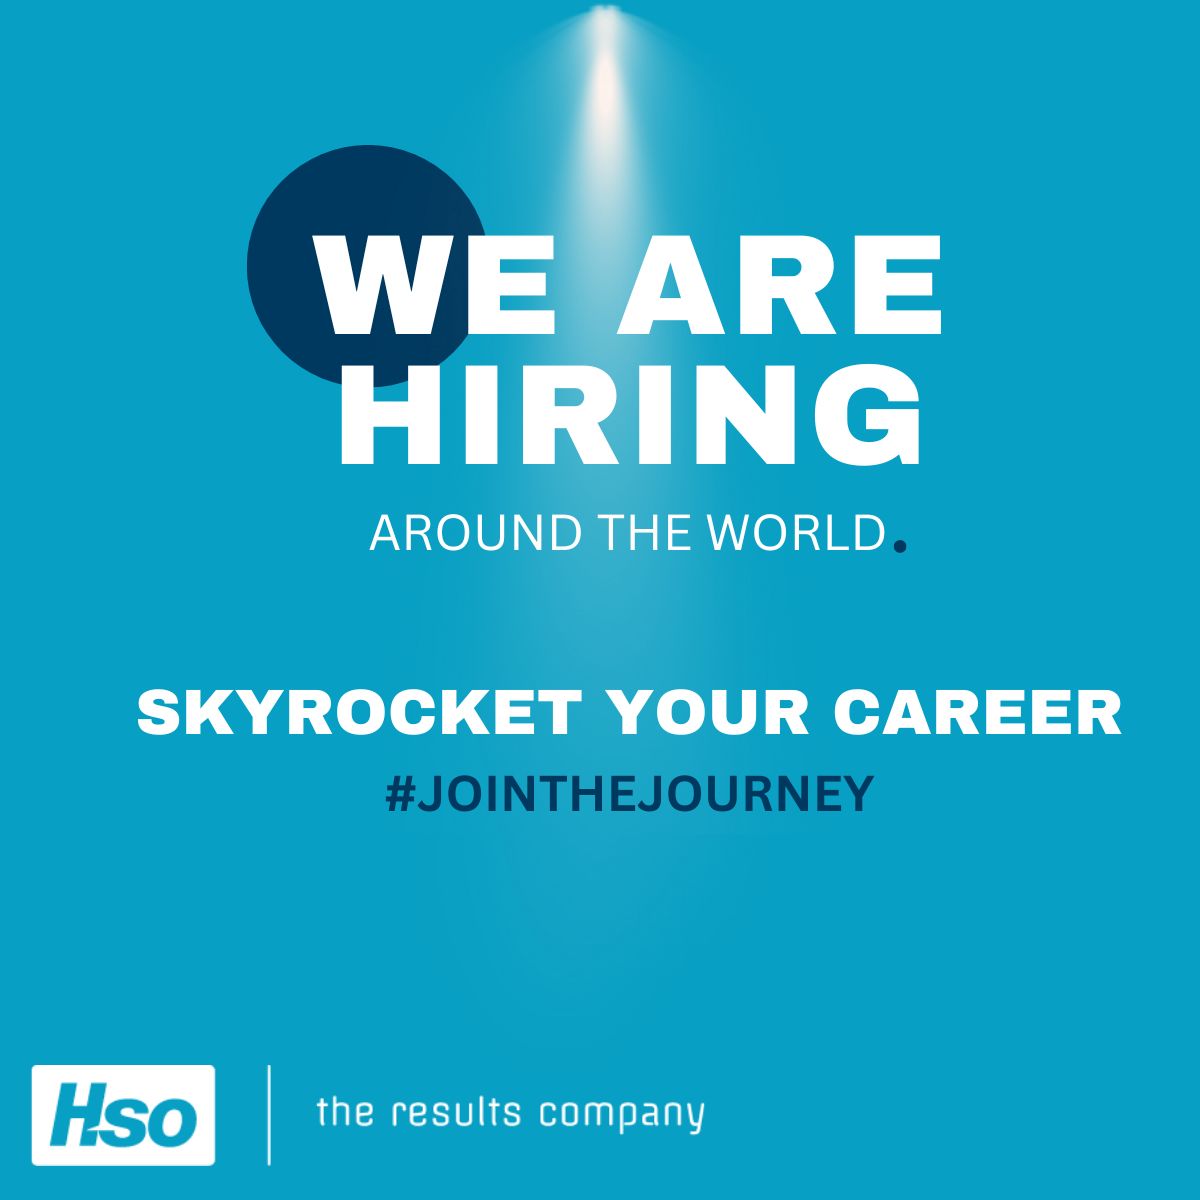 🚀 #JoinTheJourney and #SkyRocketYourCareer as Finance Consultant (m/w/d) Microsoft Dynamics 365 🚀 hso.com/de/karriere/st… #hiring #finance #ifrs #usgaap #hgb #intercompany #career #remoteworking #hybridworking #careersintech #consulting #digitaltransformation #erp #bundesweit